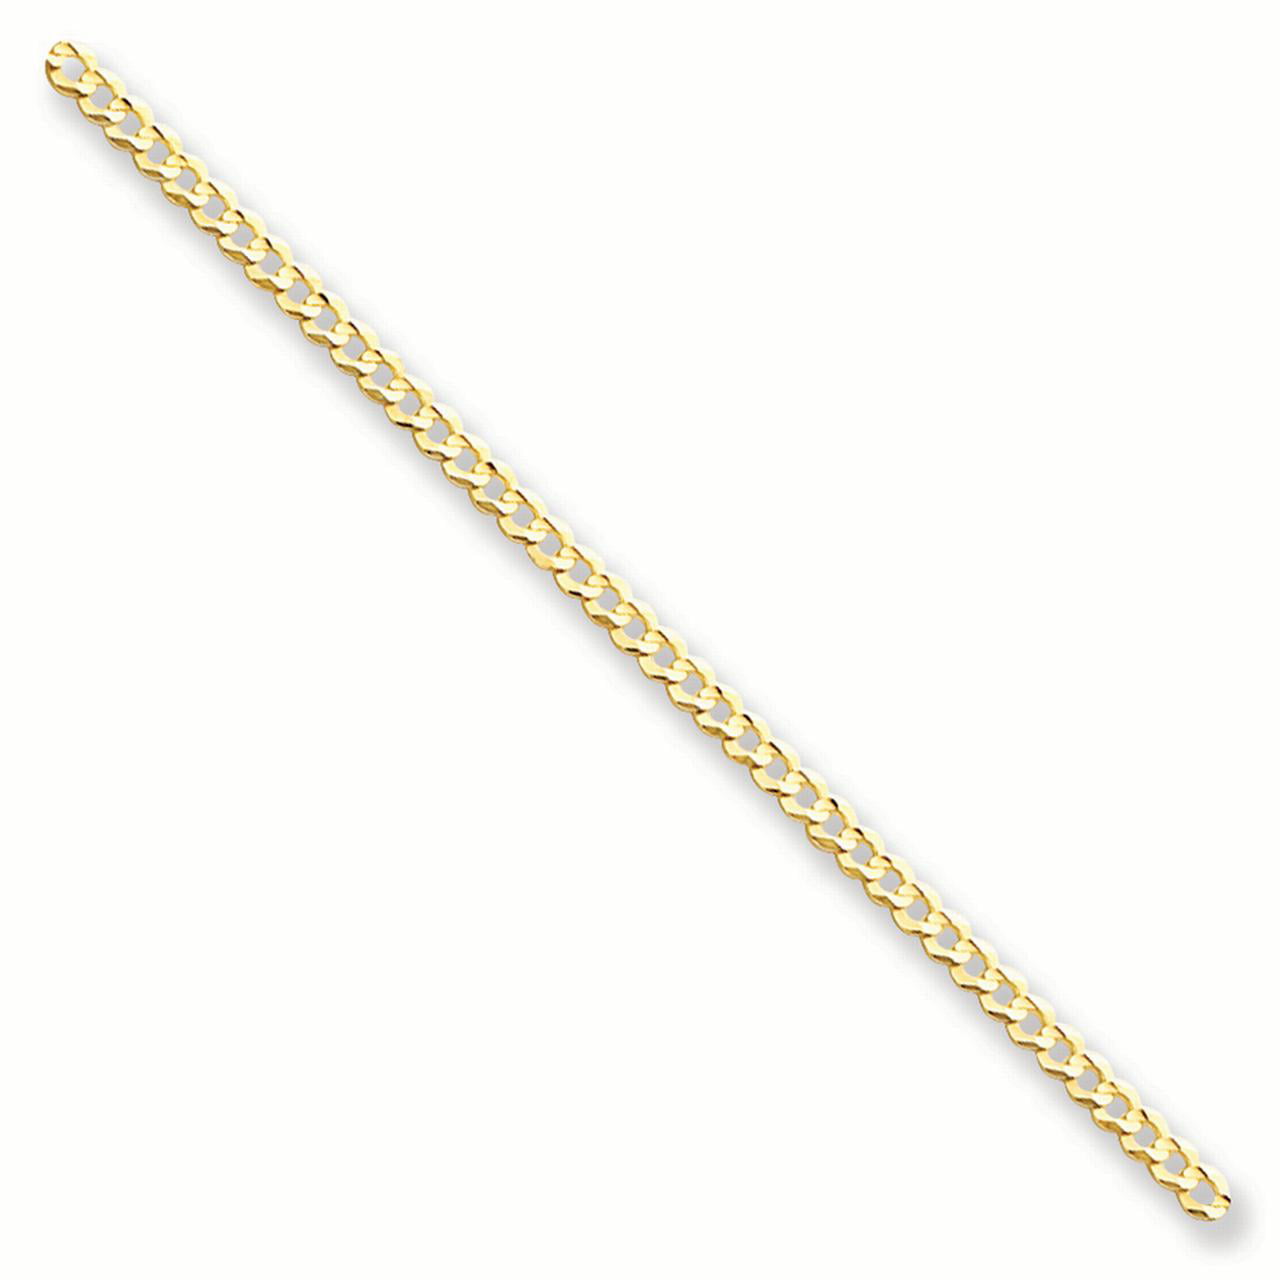 PriceRock 10K Solid Yellow Gold Figaro Lite Bracelet 4.6mm Thick 7 Inches